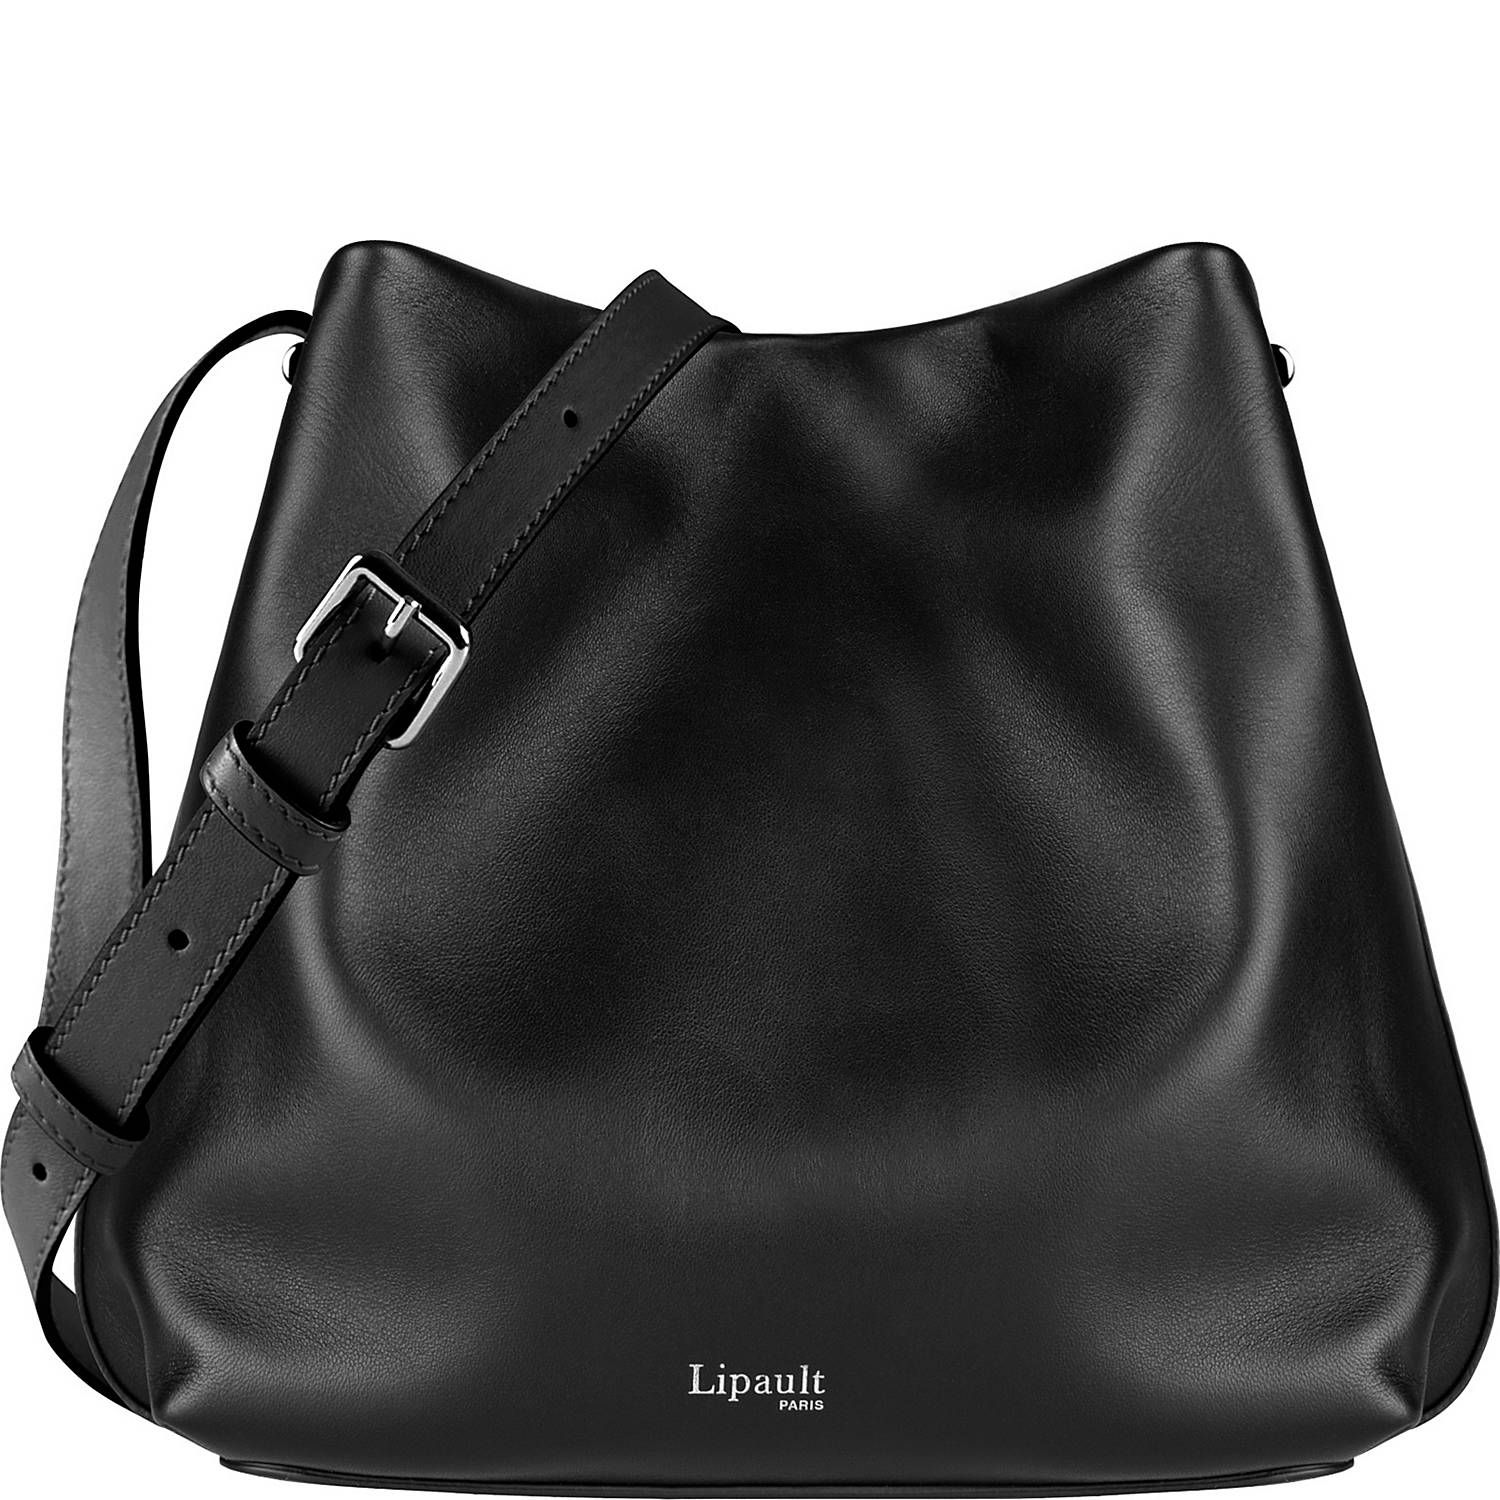 https://www.ebags.com/product/lipault/by-the-seine-bucket-shoulder-bag/360993?productid=10671280 | eBags